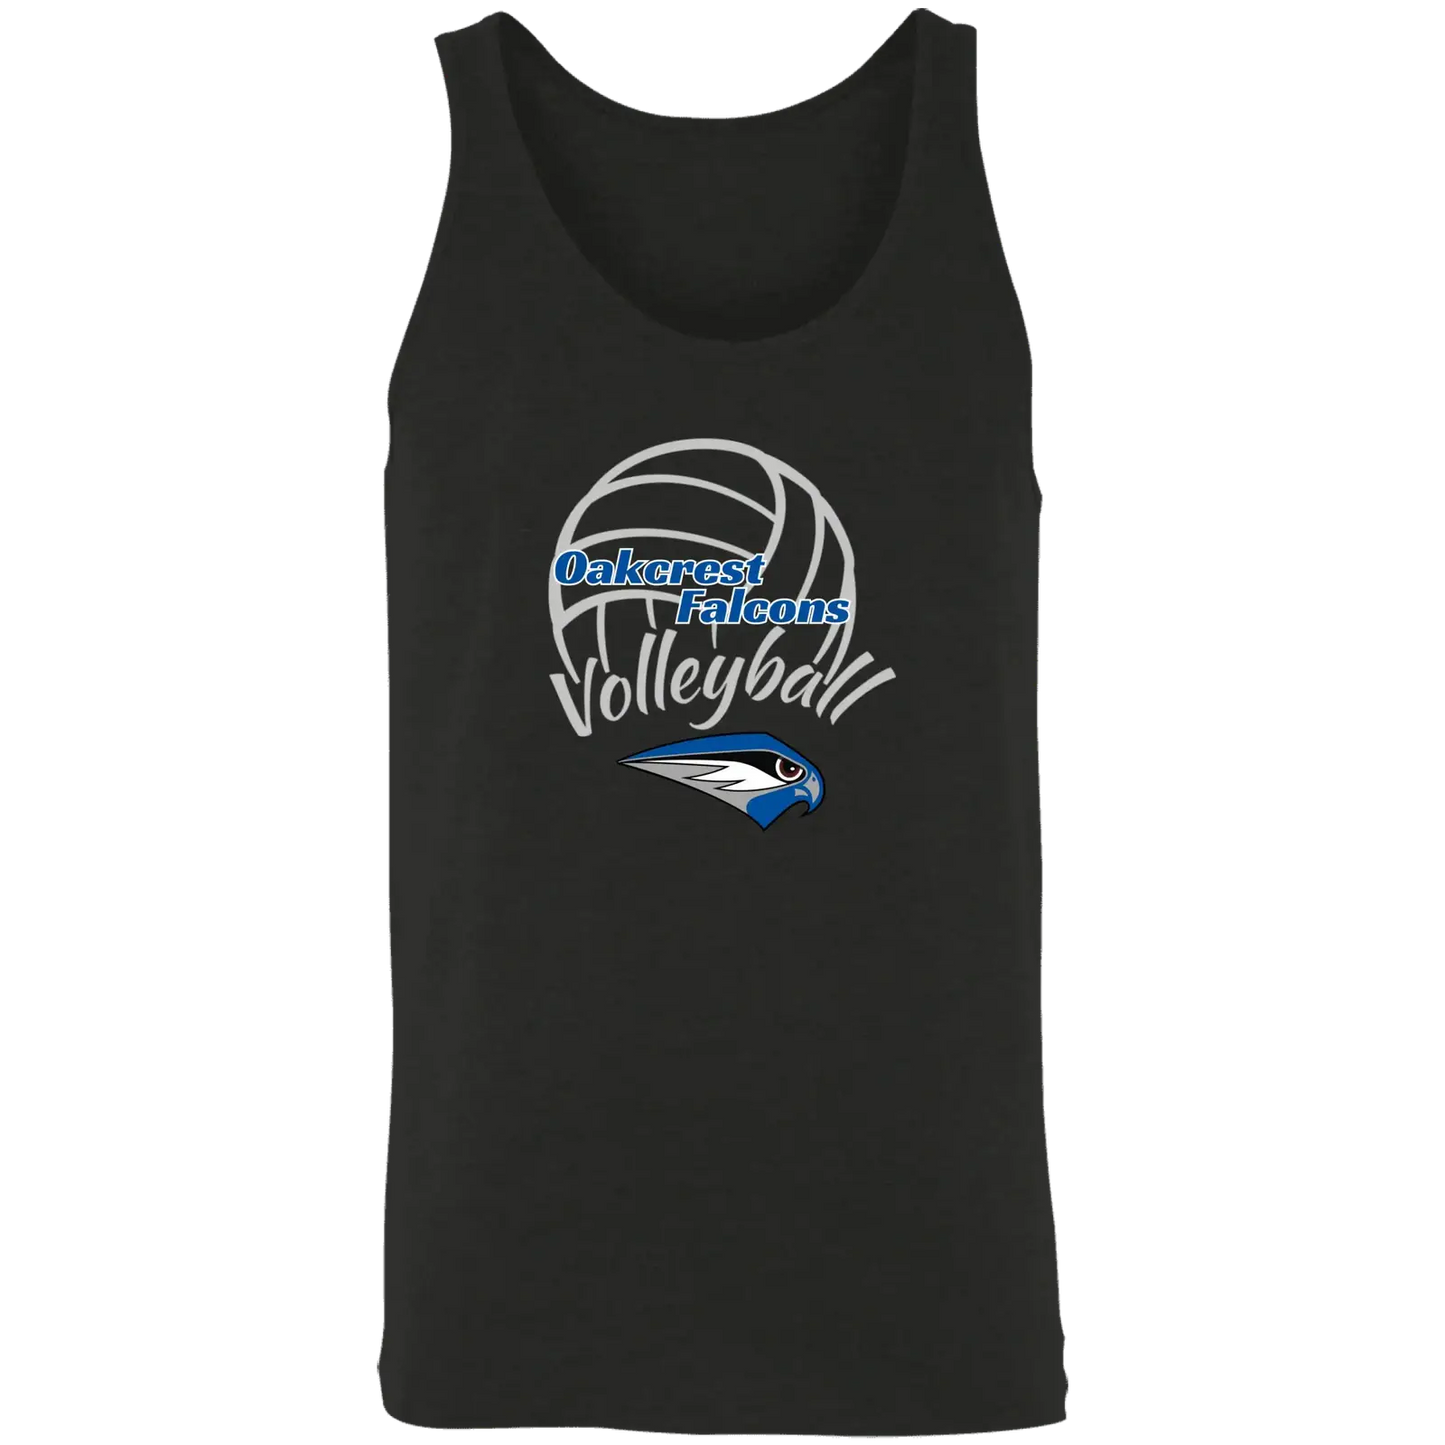 OHS Volleyball Tanks